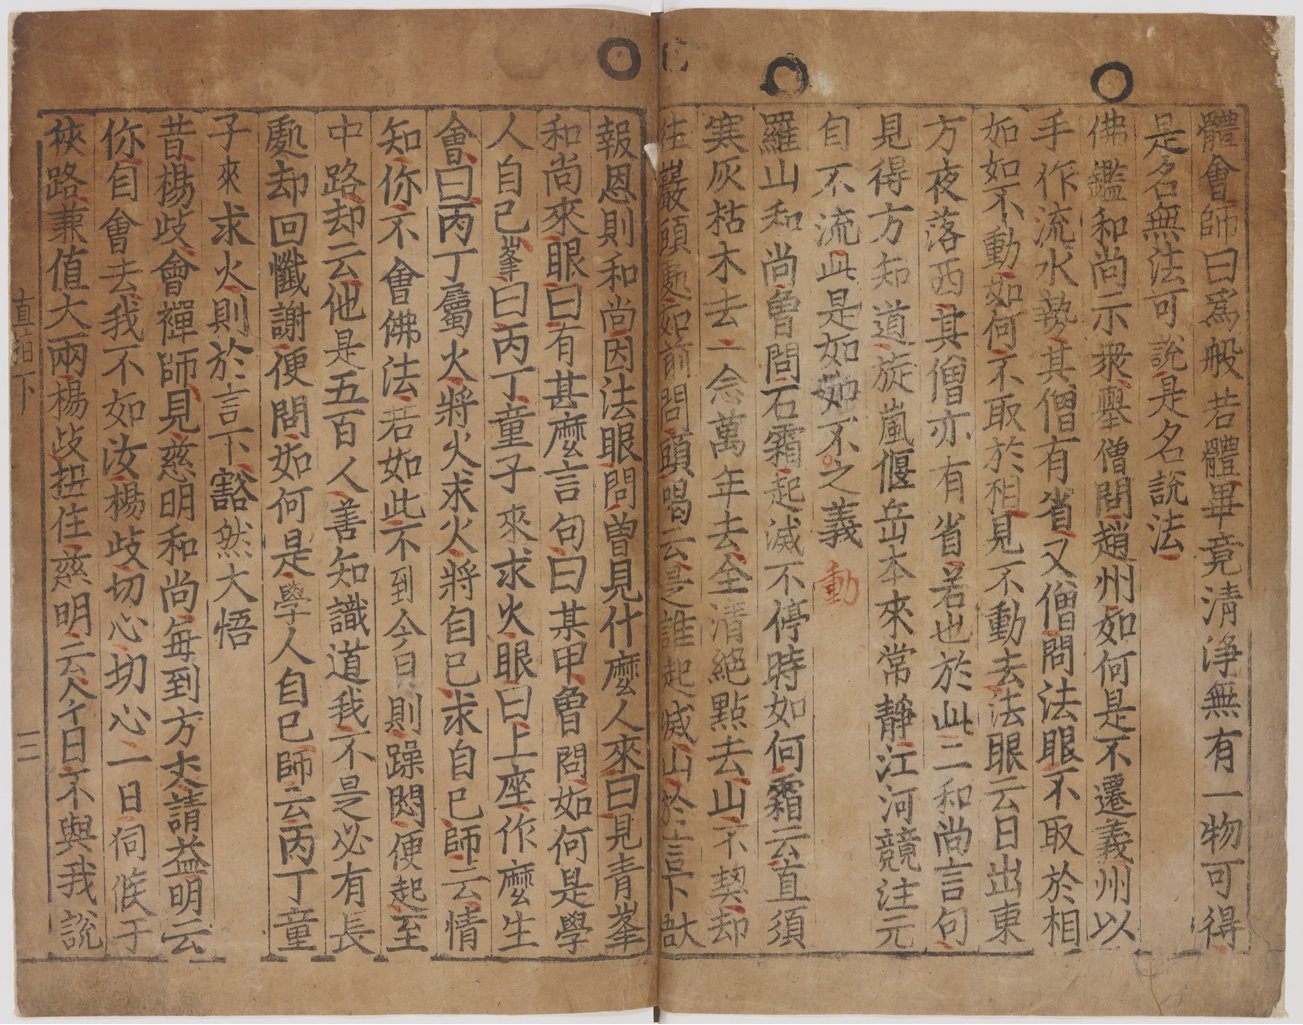 Pages from the world's oldest extant book printed with movable metal type, Anthology of Great Buddhist Priests' Zen Teachings, 1377, 24. 5 x 17 cm (Bibliothèque nationale de France)